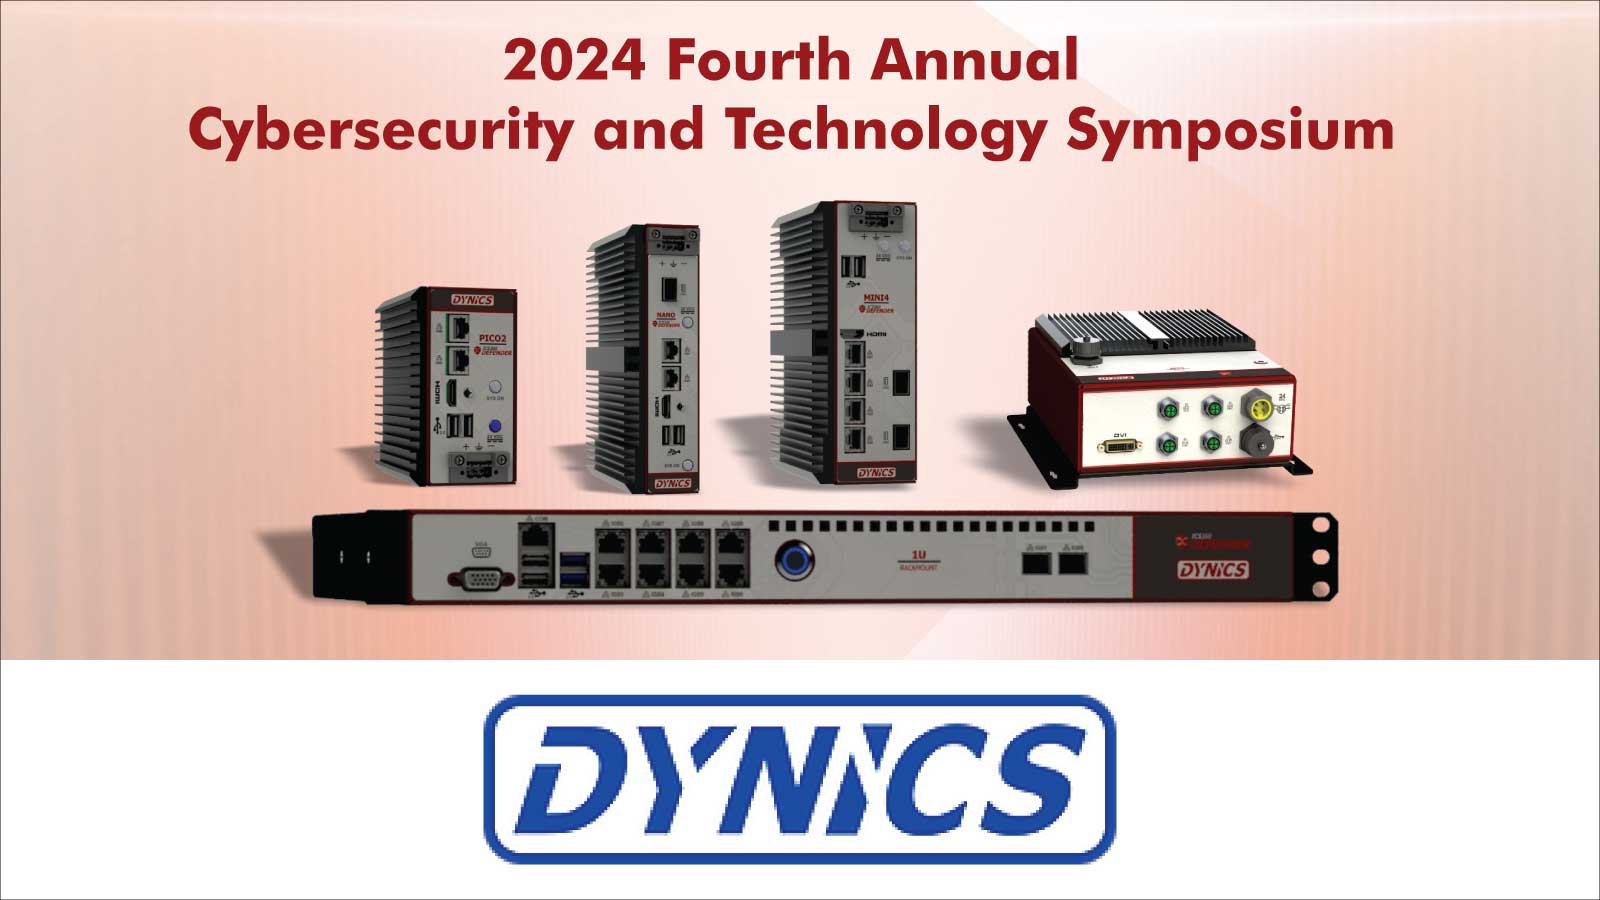 2024 FOURTH ANNUAL Cybersecurity and Technology Symposium